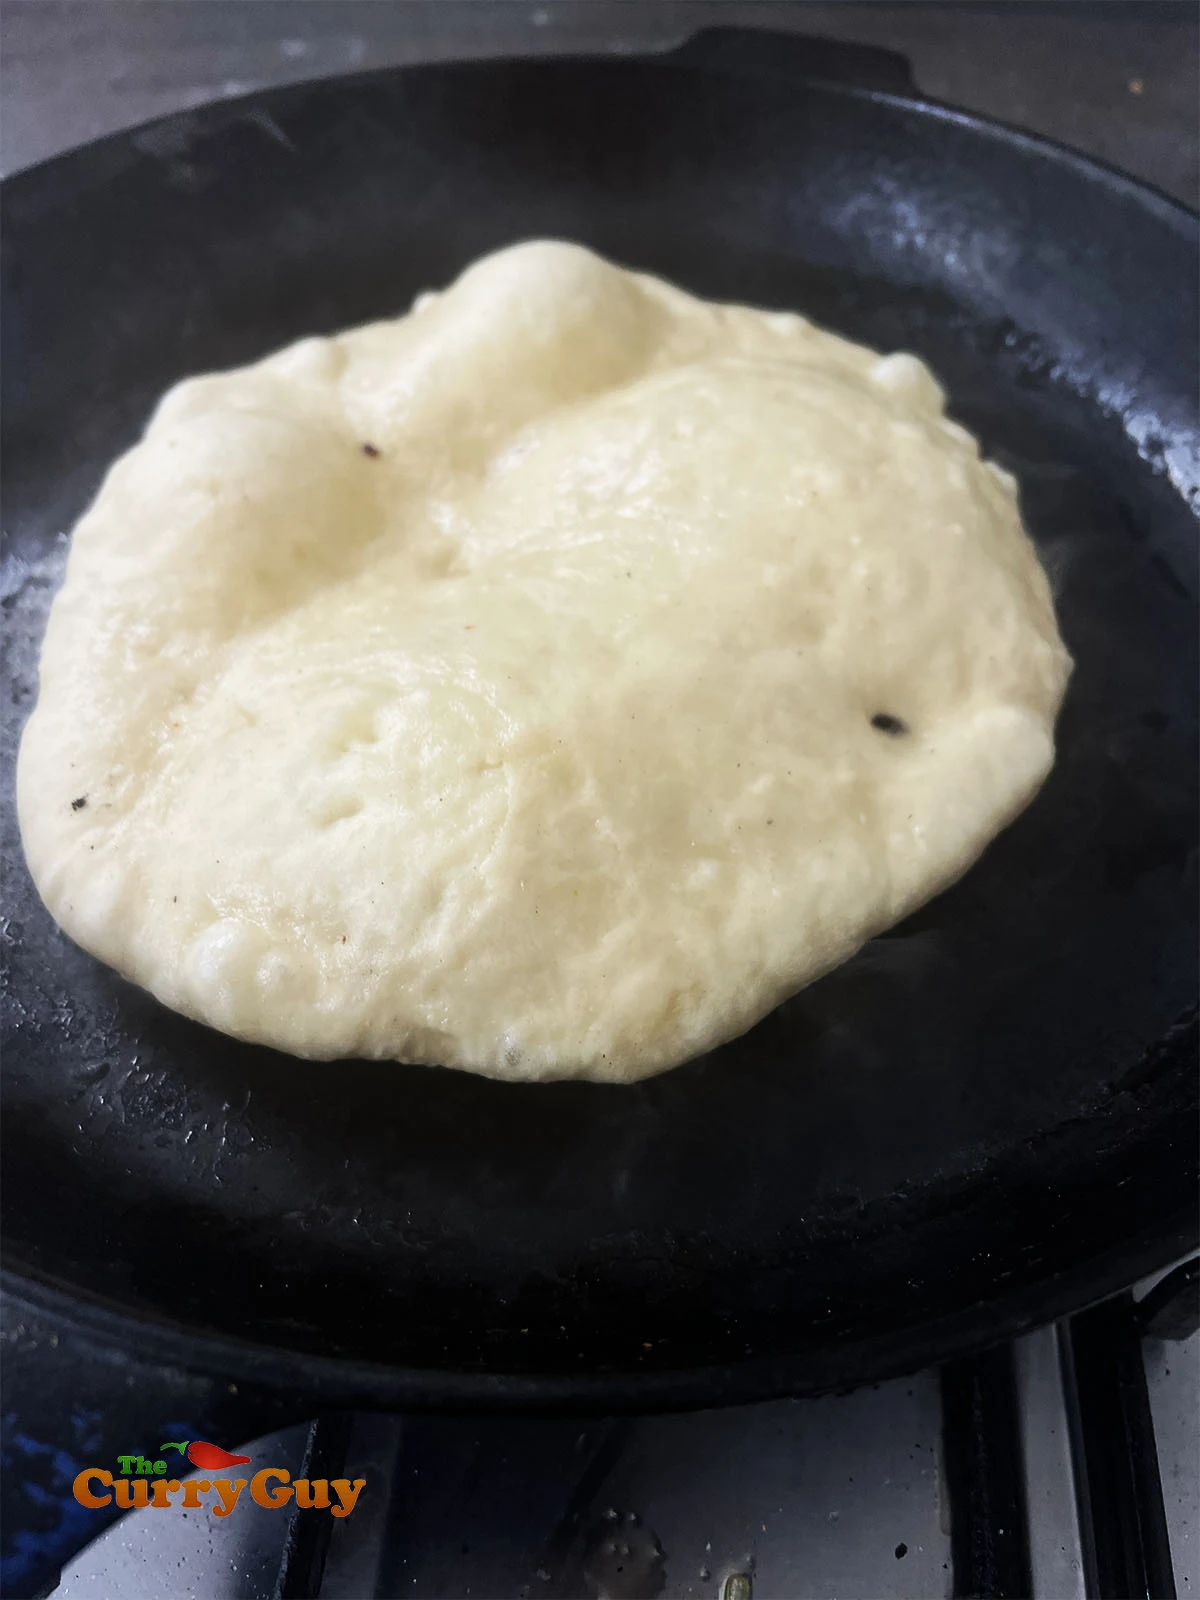 The naan bubbling up in the pan.